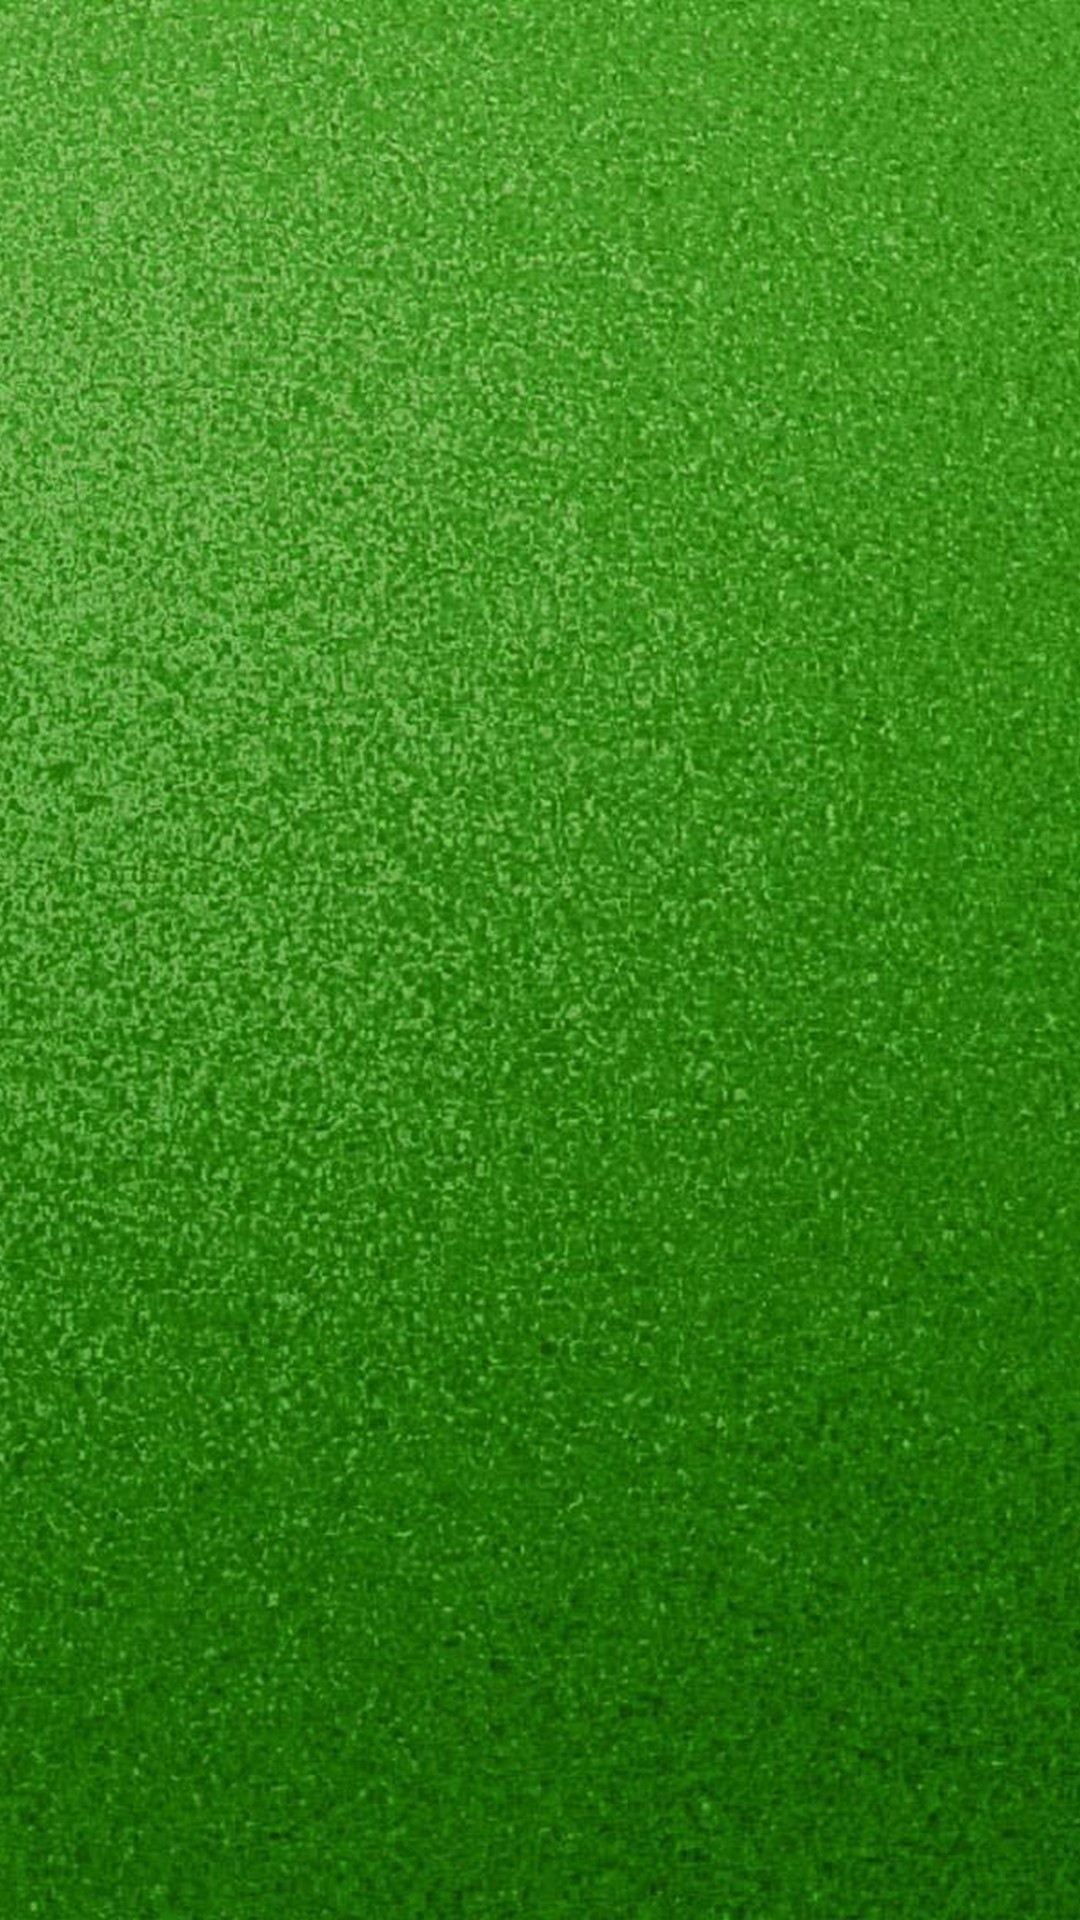 Green iPhone 13 Wallpaper HD with high-resolution 1080x1920 pixel. Download all Mobile Wallpapers and Use them as wallpapers for your iPhone, Tablet, iPad, Android and other mobile devices